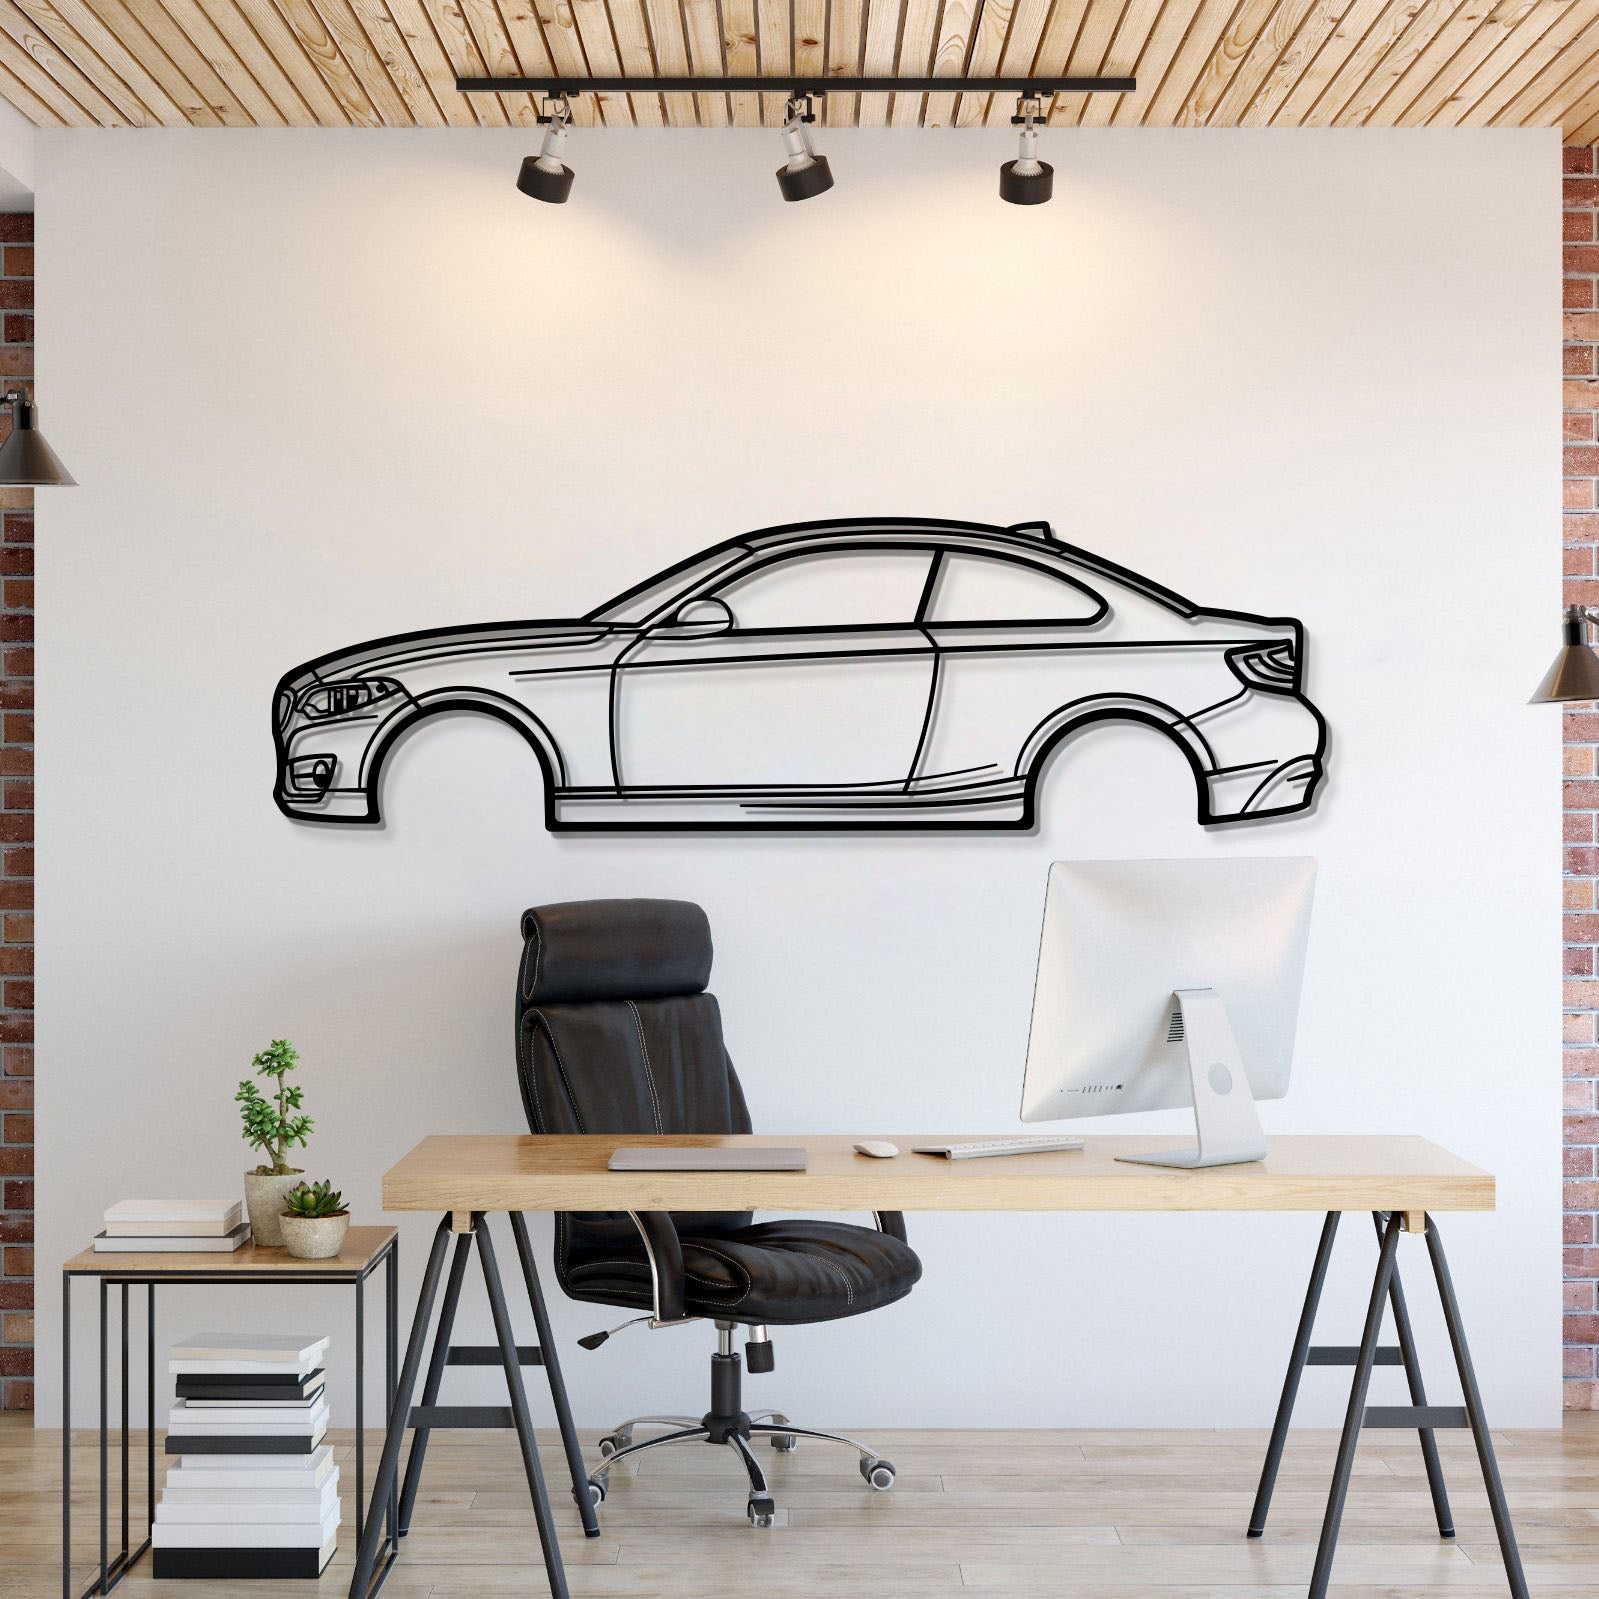 2015 2 SERIE COUPE Metal Car Wall Art - MT0517